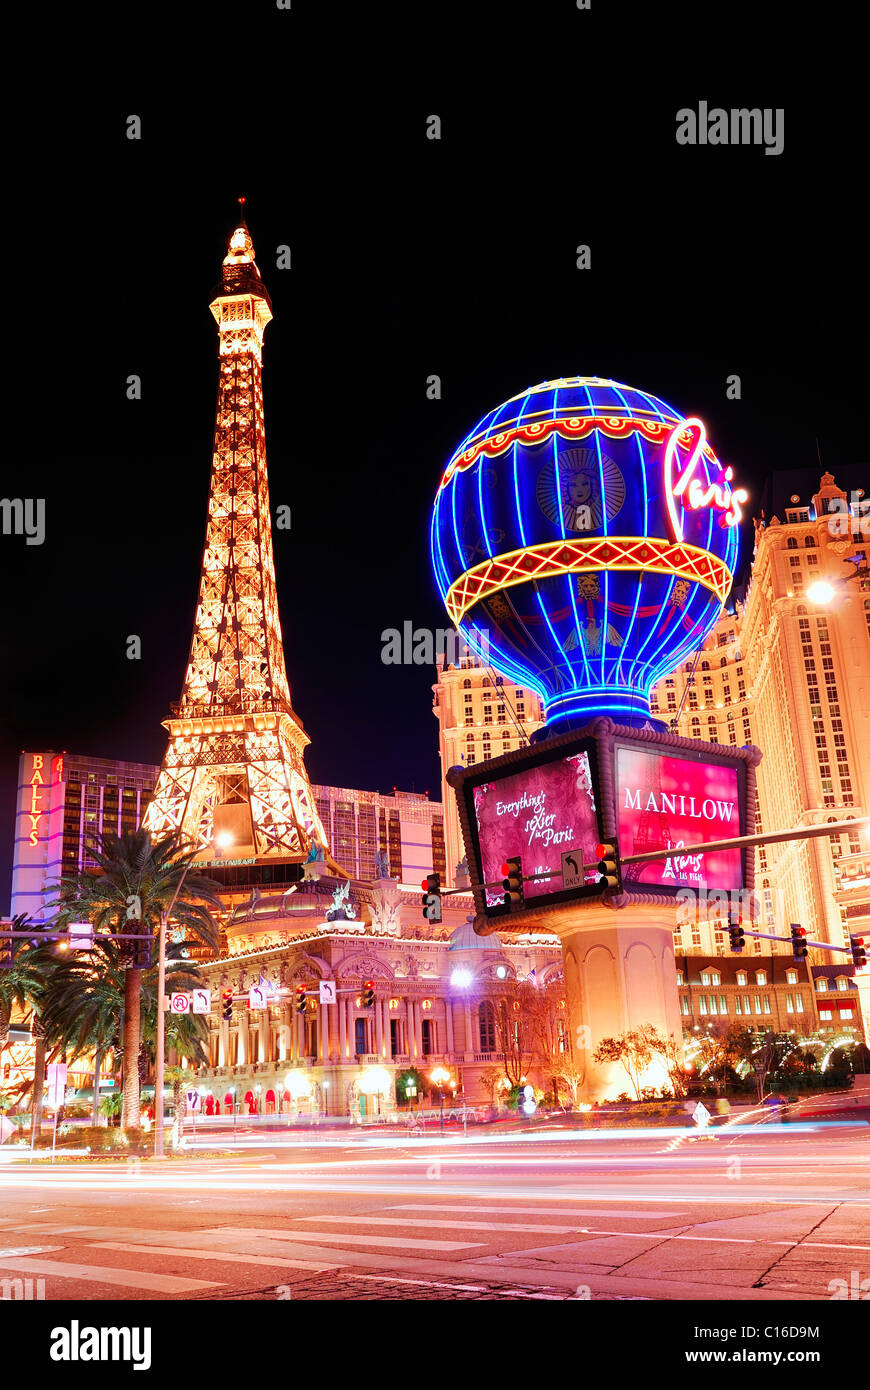 Paris Las Vegas hotel and Casino sign in the shape of the